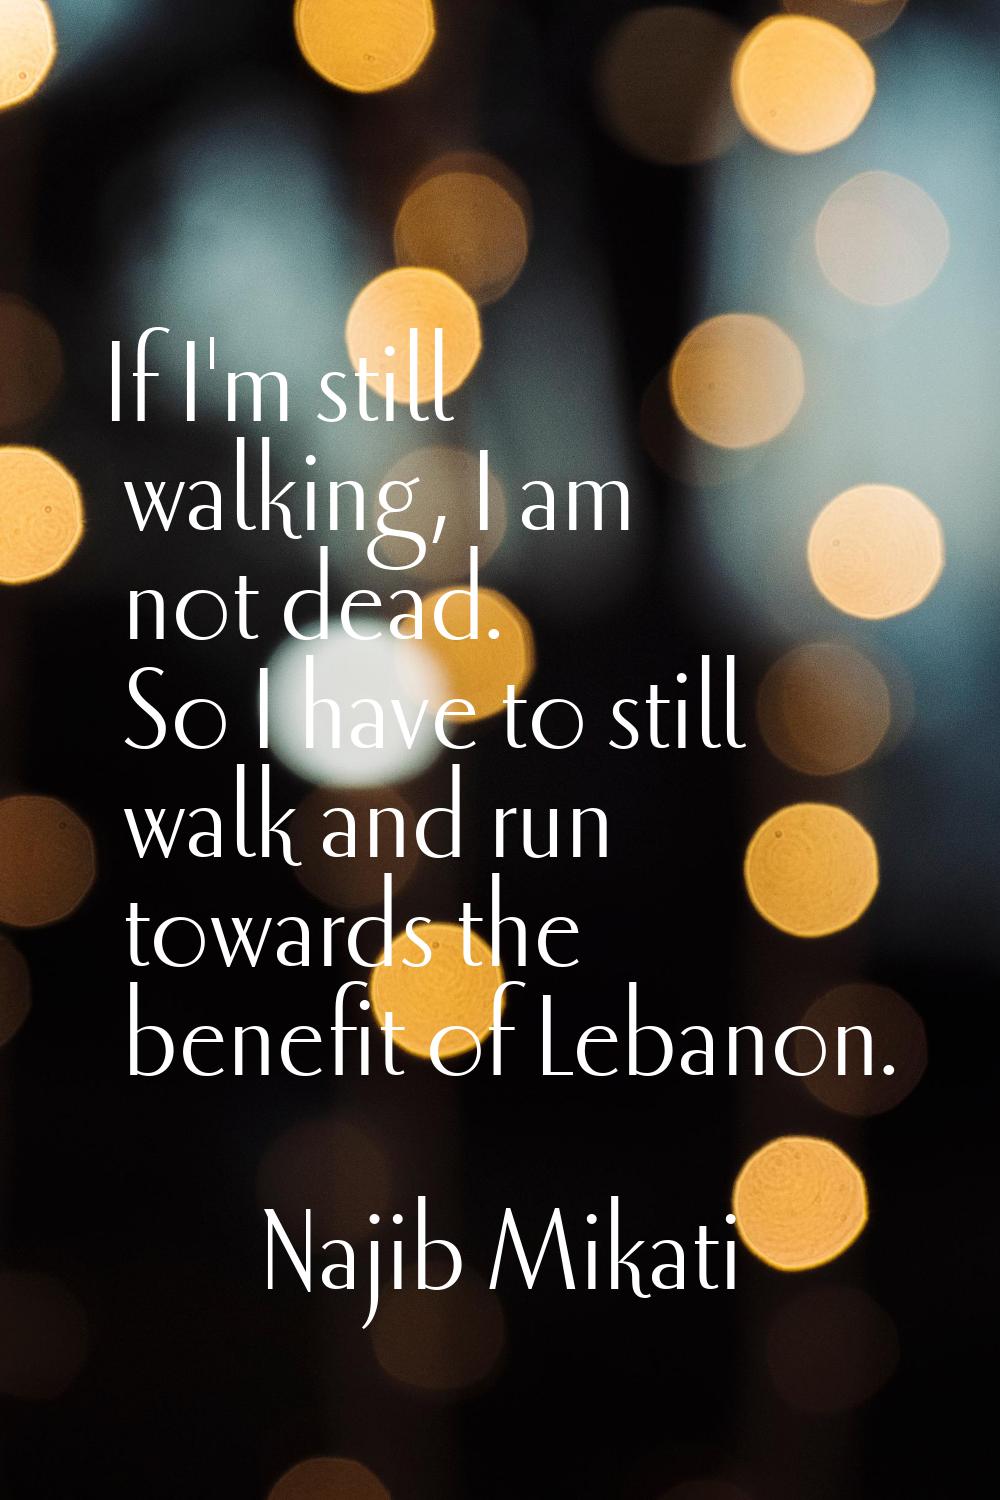 If I'm still walking, I am not dead. So I have to still walk and run towards the benefit of Lebanon